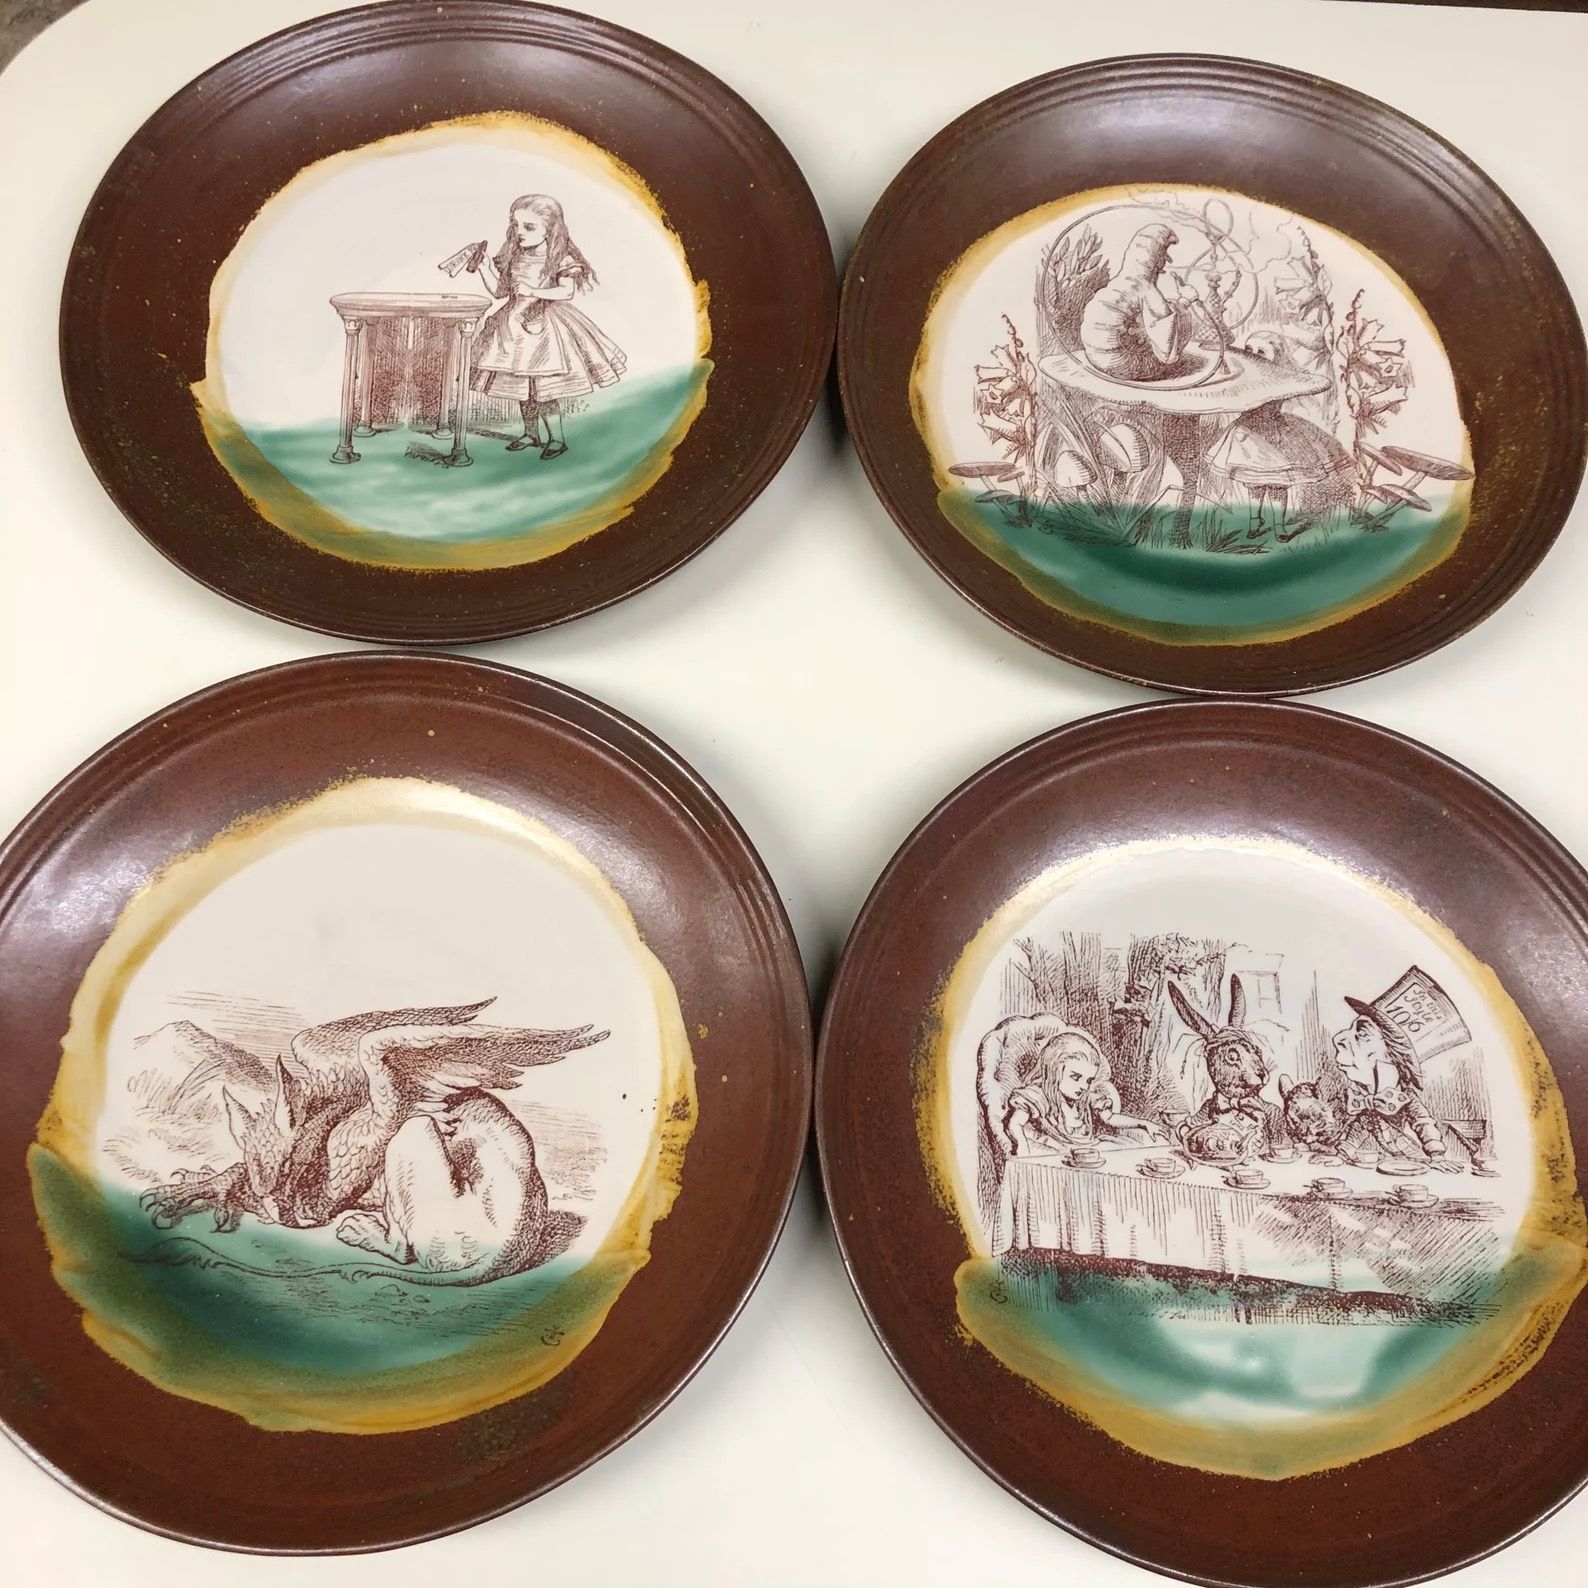 Four ceramic plates with brown rims and painted images from Alice in Wonderland in their centers.